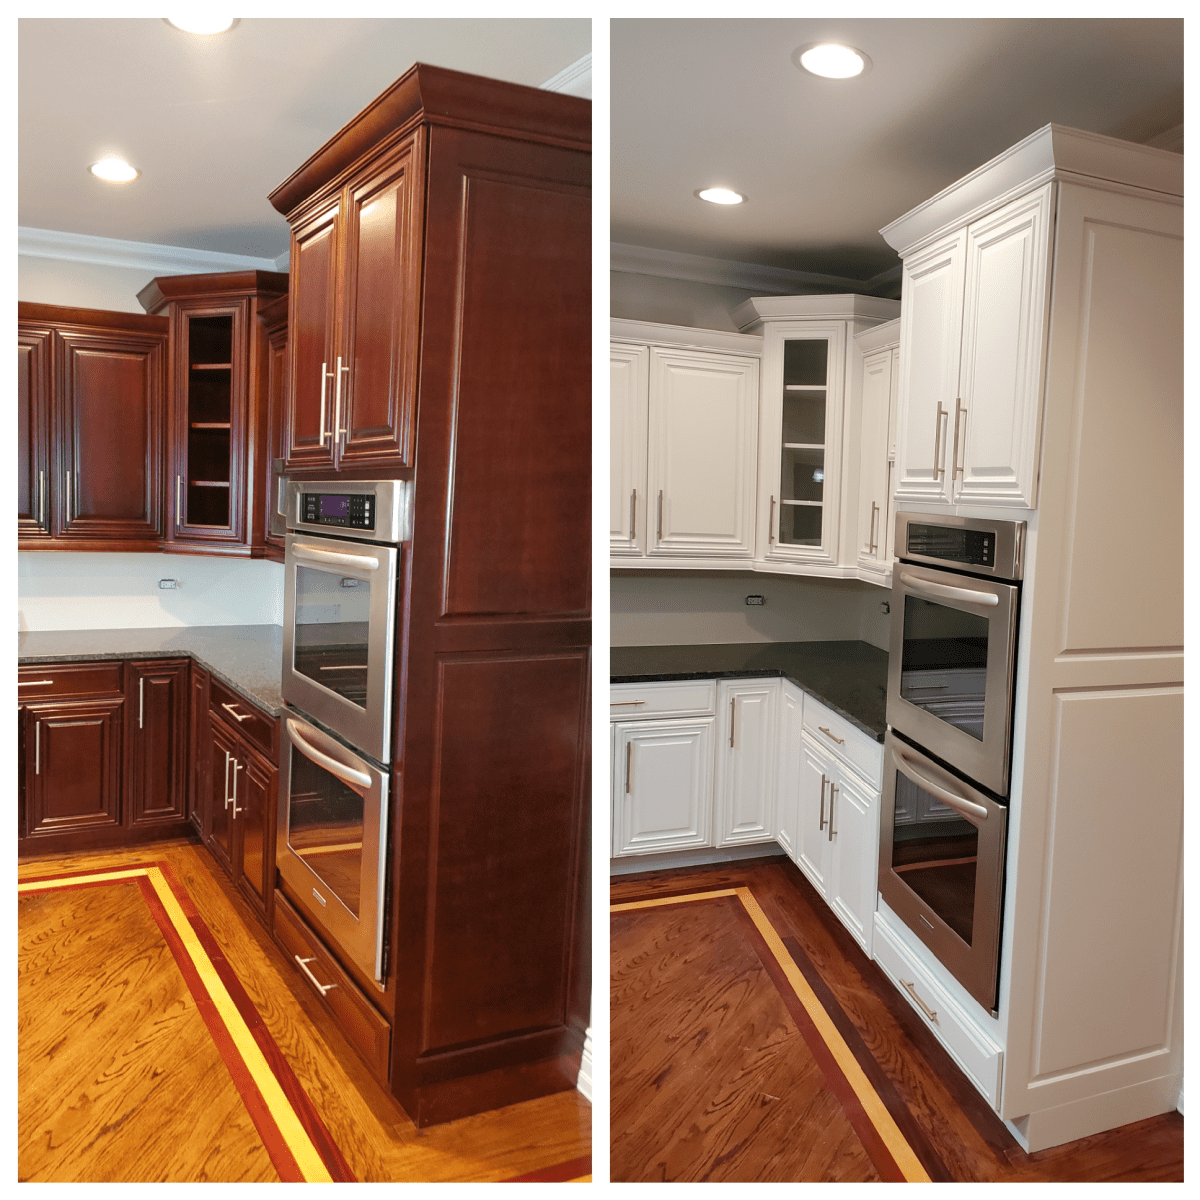 Tips For Painting Cherry Cabinets White, Can You Paint Birch Cabinets White